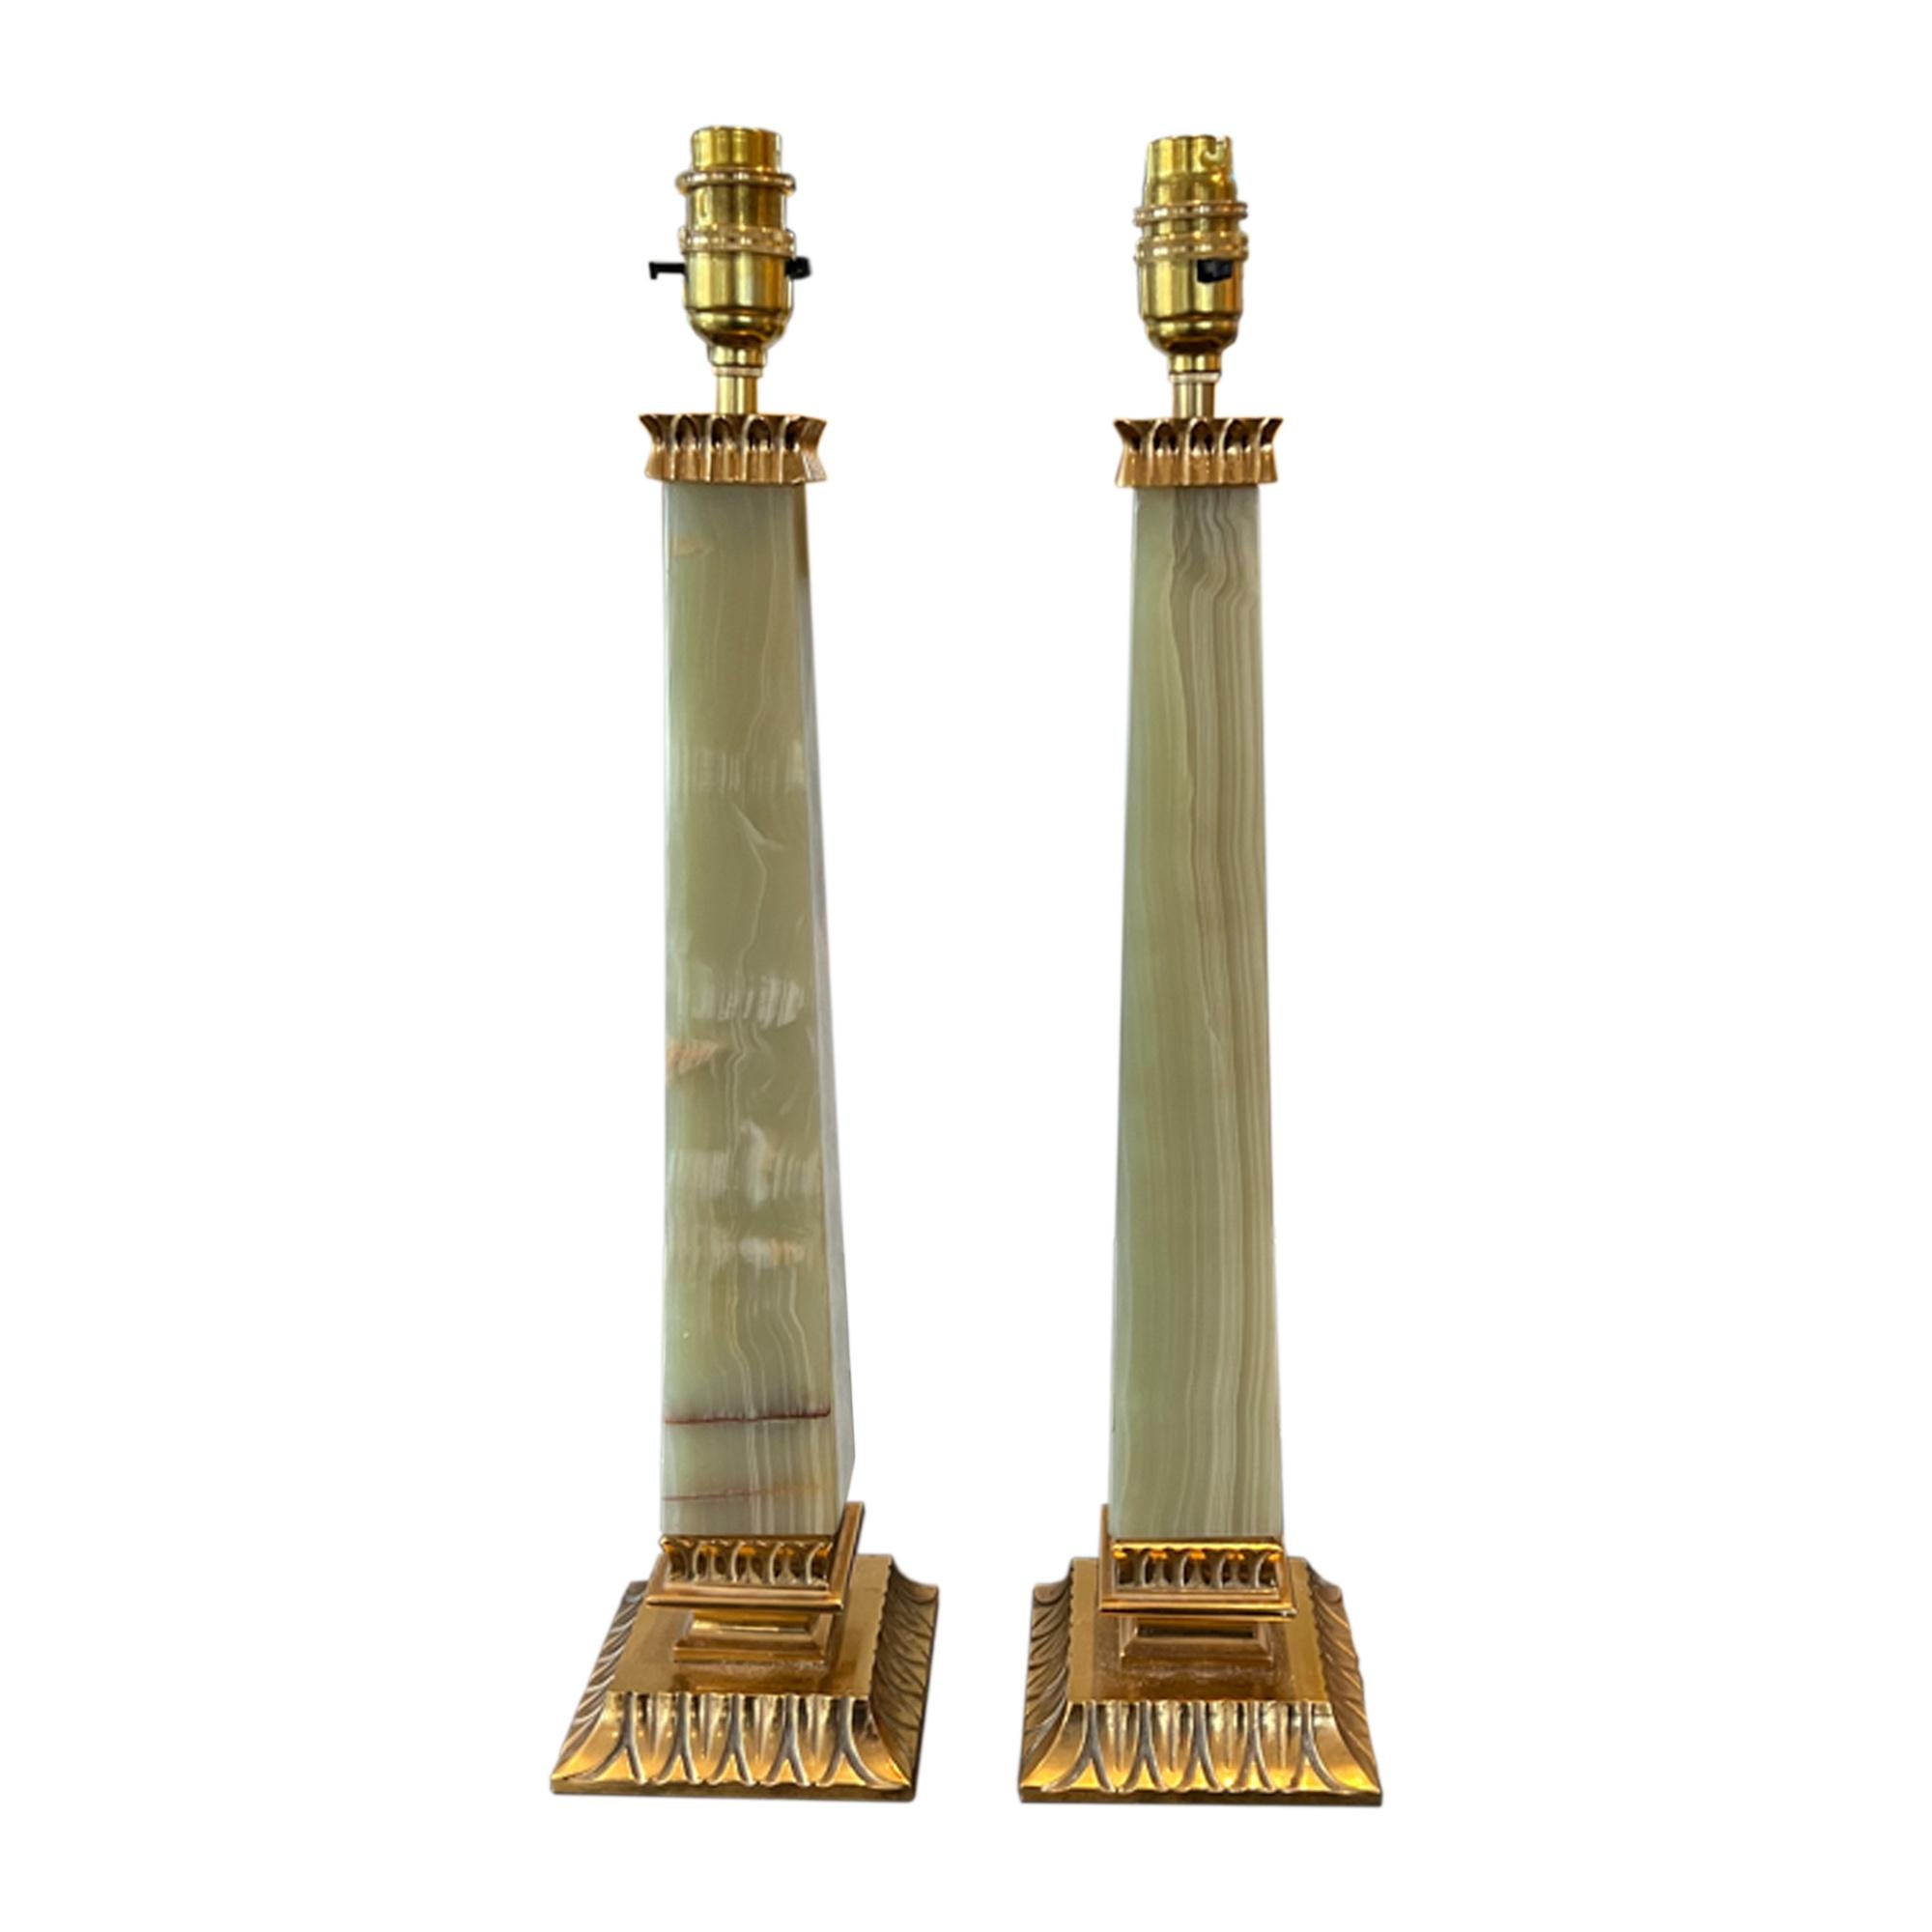 A very attractive pair of onyx table lamps - please take a look at all our pictures to see the natural pigmentation in each piece of stone. An elegant shape with tapering columns. 

The lovely pale green colour is enhanced with the brass trim -